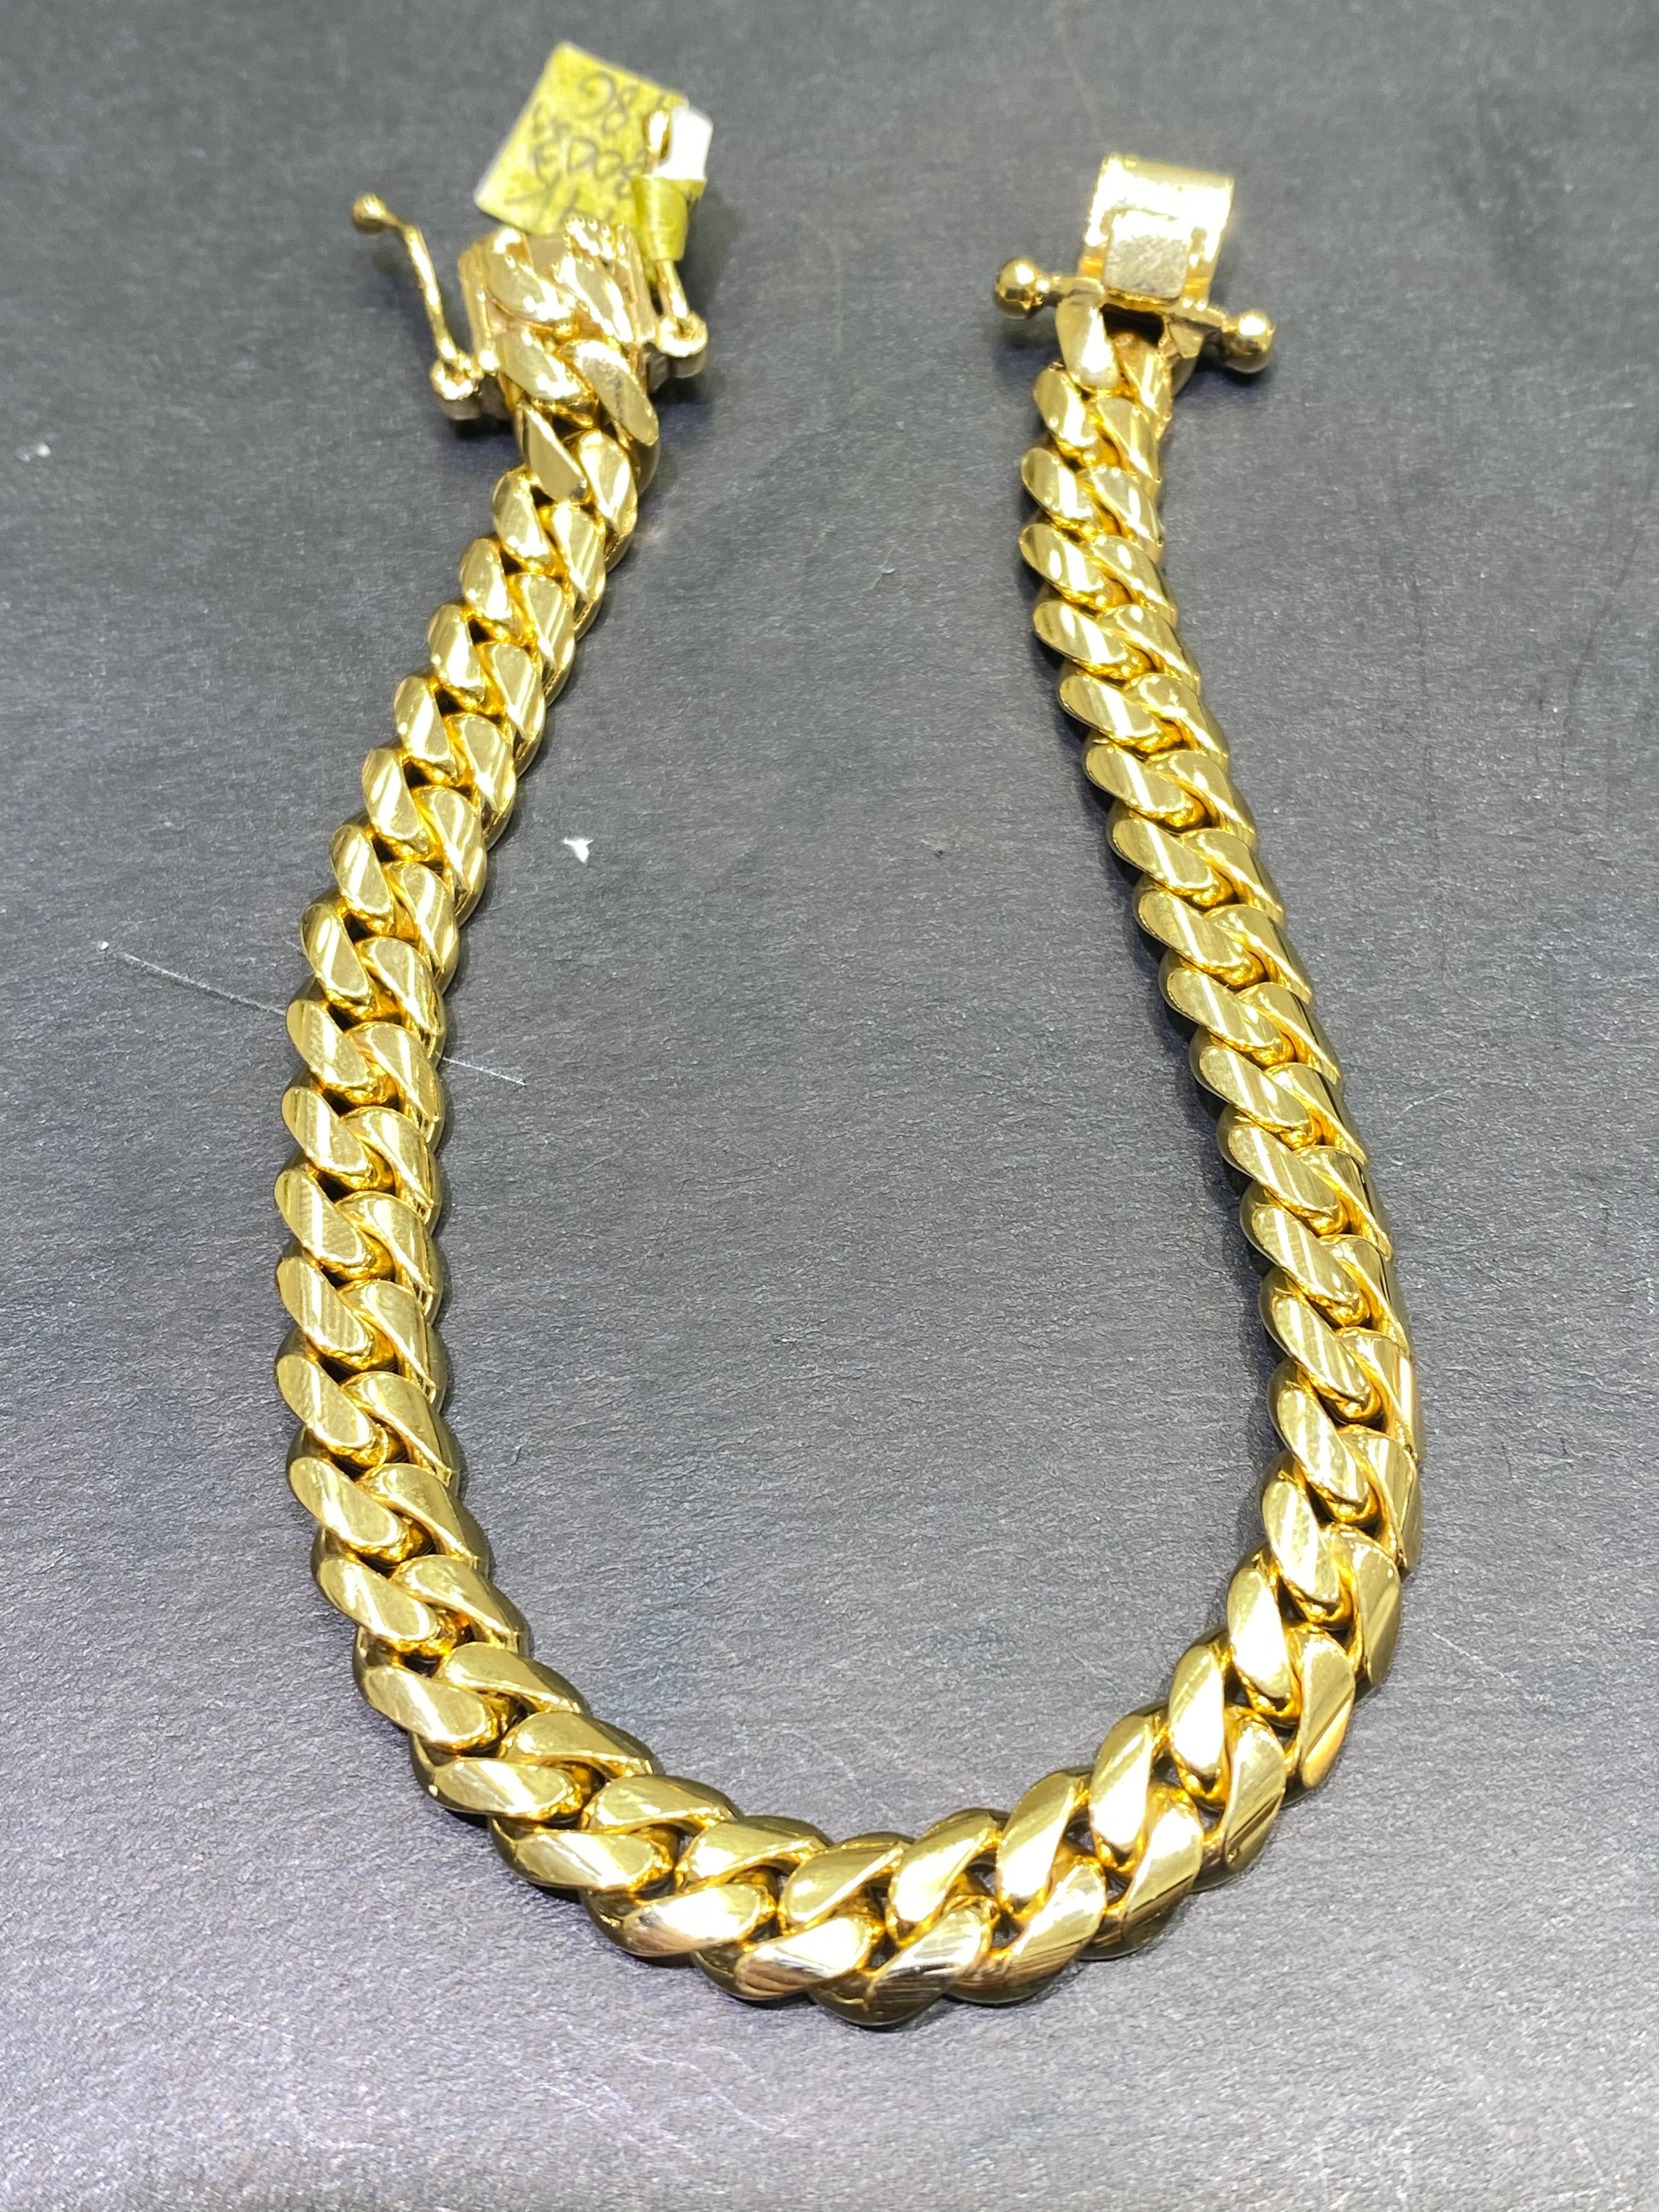 new 10k solid miami cuban link bracelet 10.2mm wide,8.5 inches,47 grams